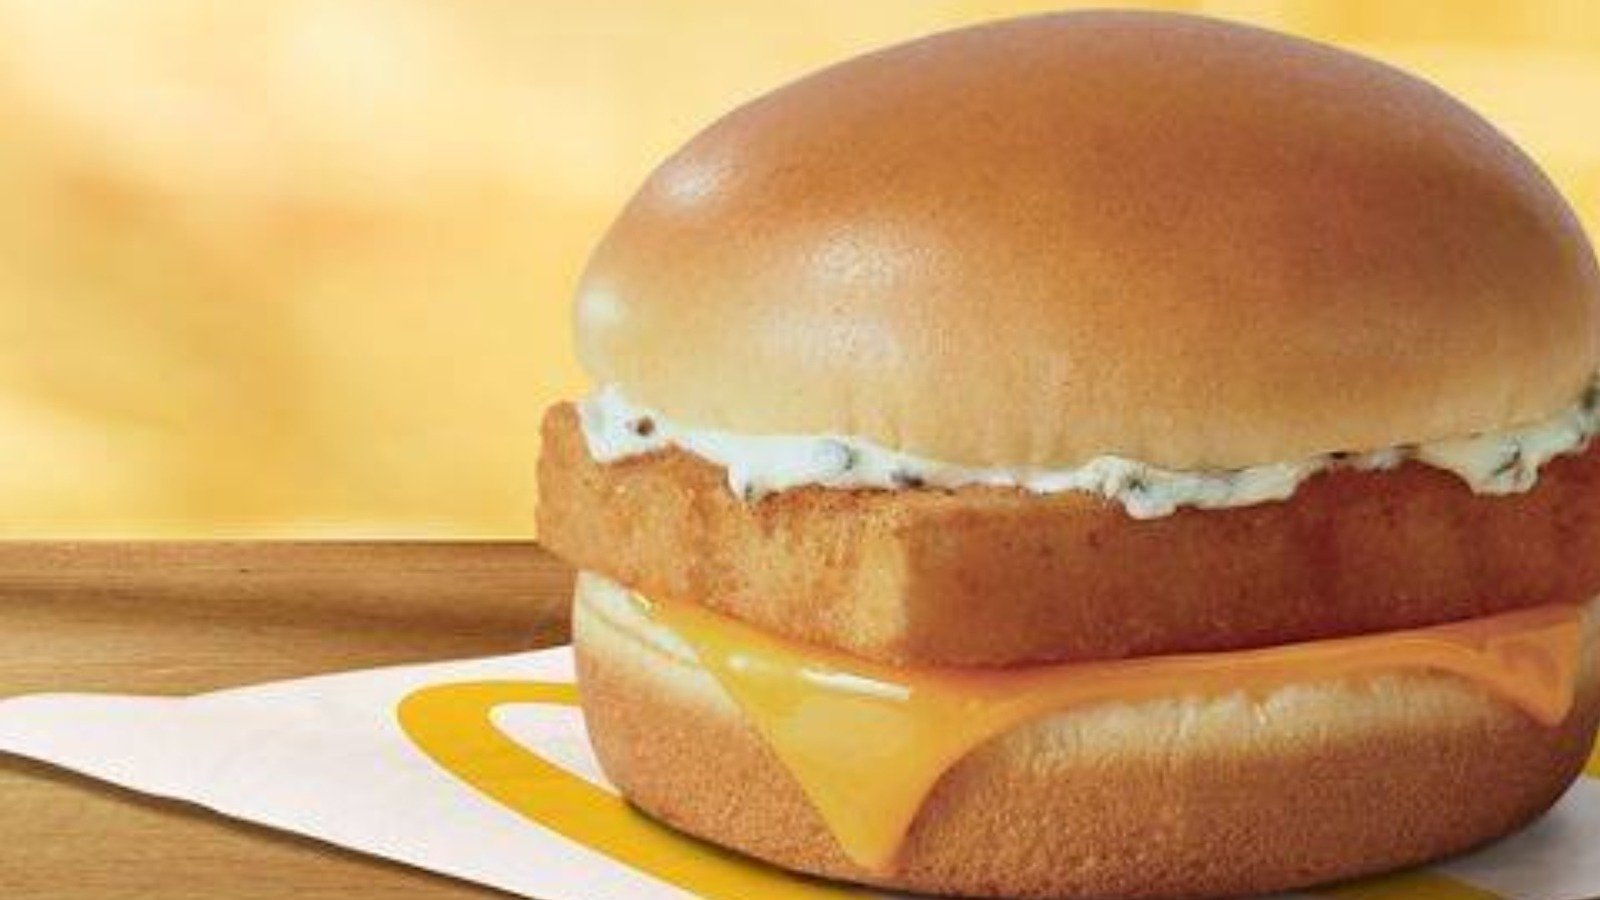 Over 35% Of People Agree That This Fast Food Restaurant Has The Best Fish Sandwich